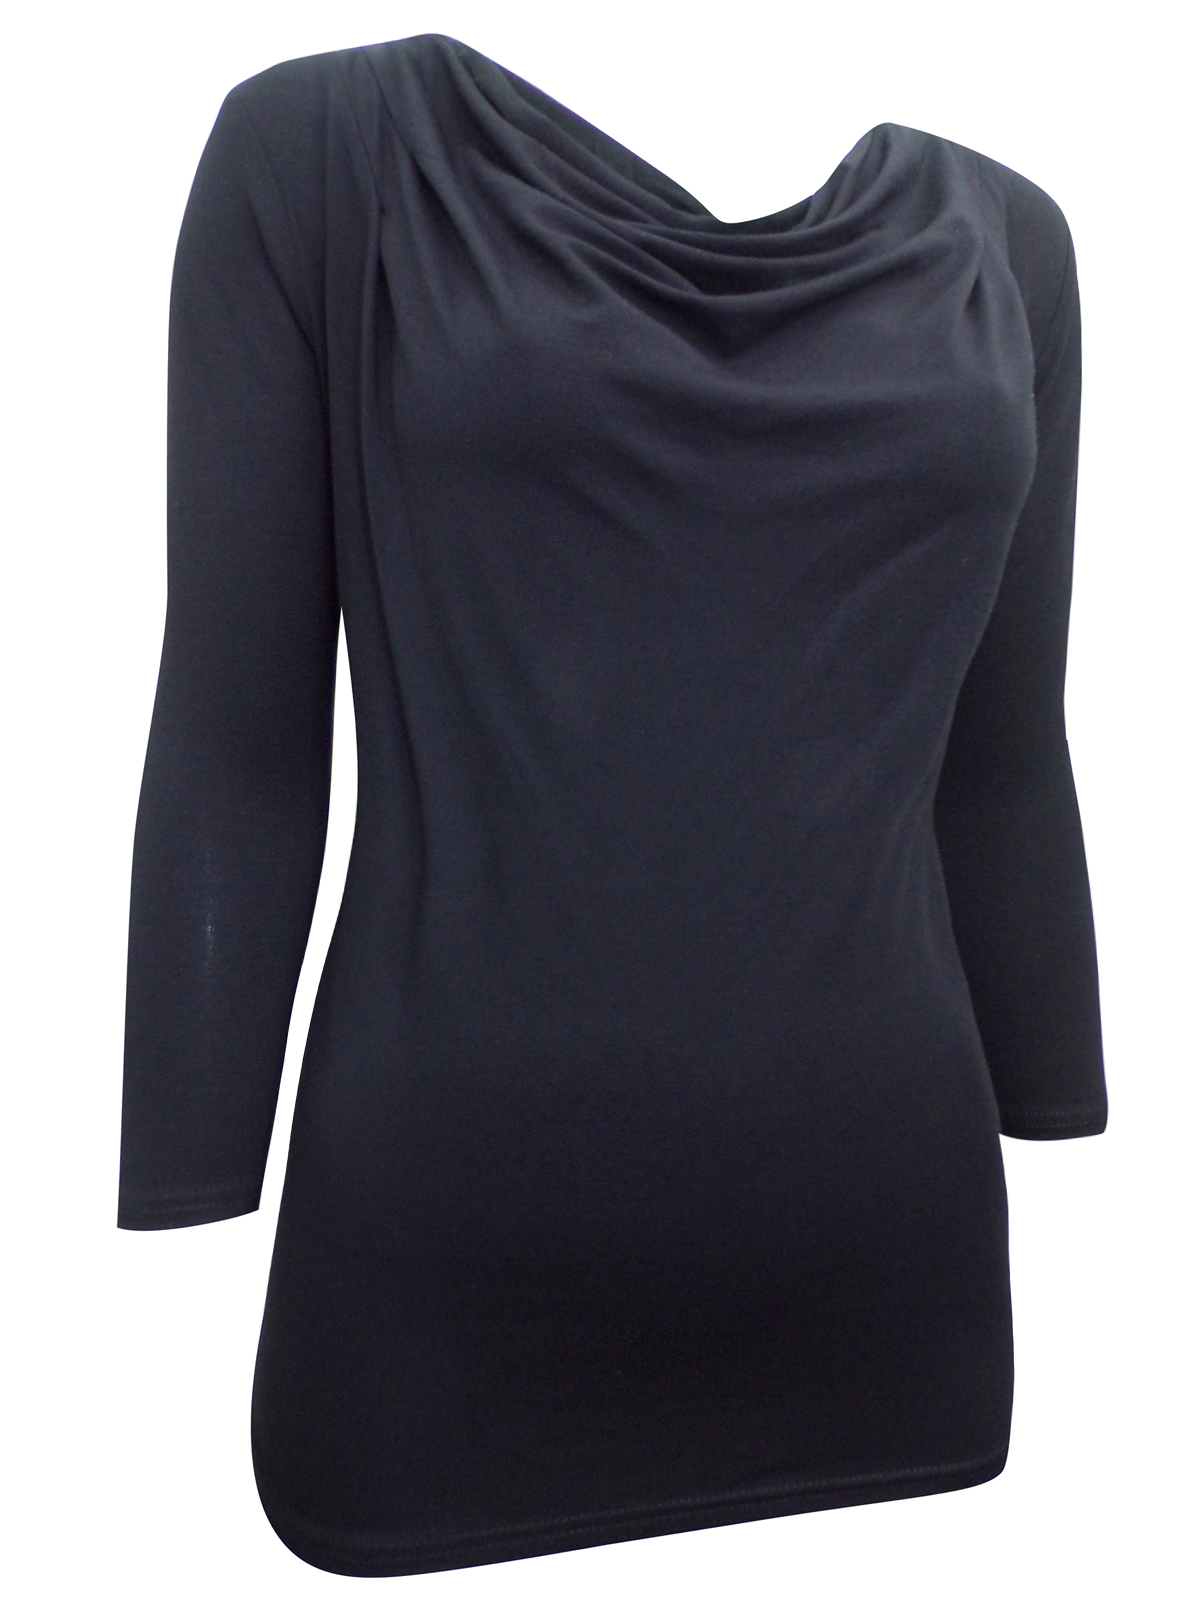 Pure Collection - - Pure BLACK Cowl Neck 3/4 Sleeve Jersey Top - Size 8 ...